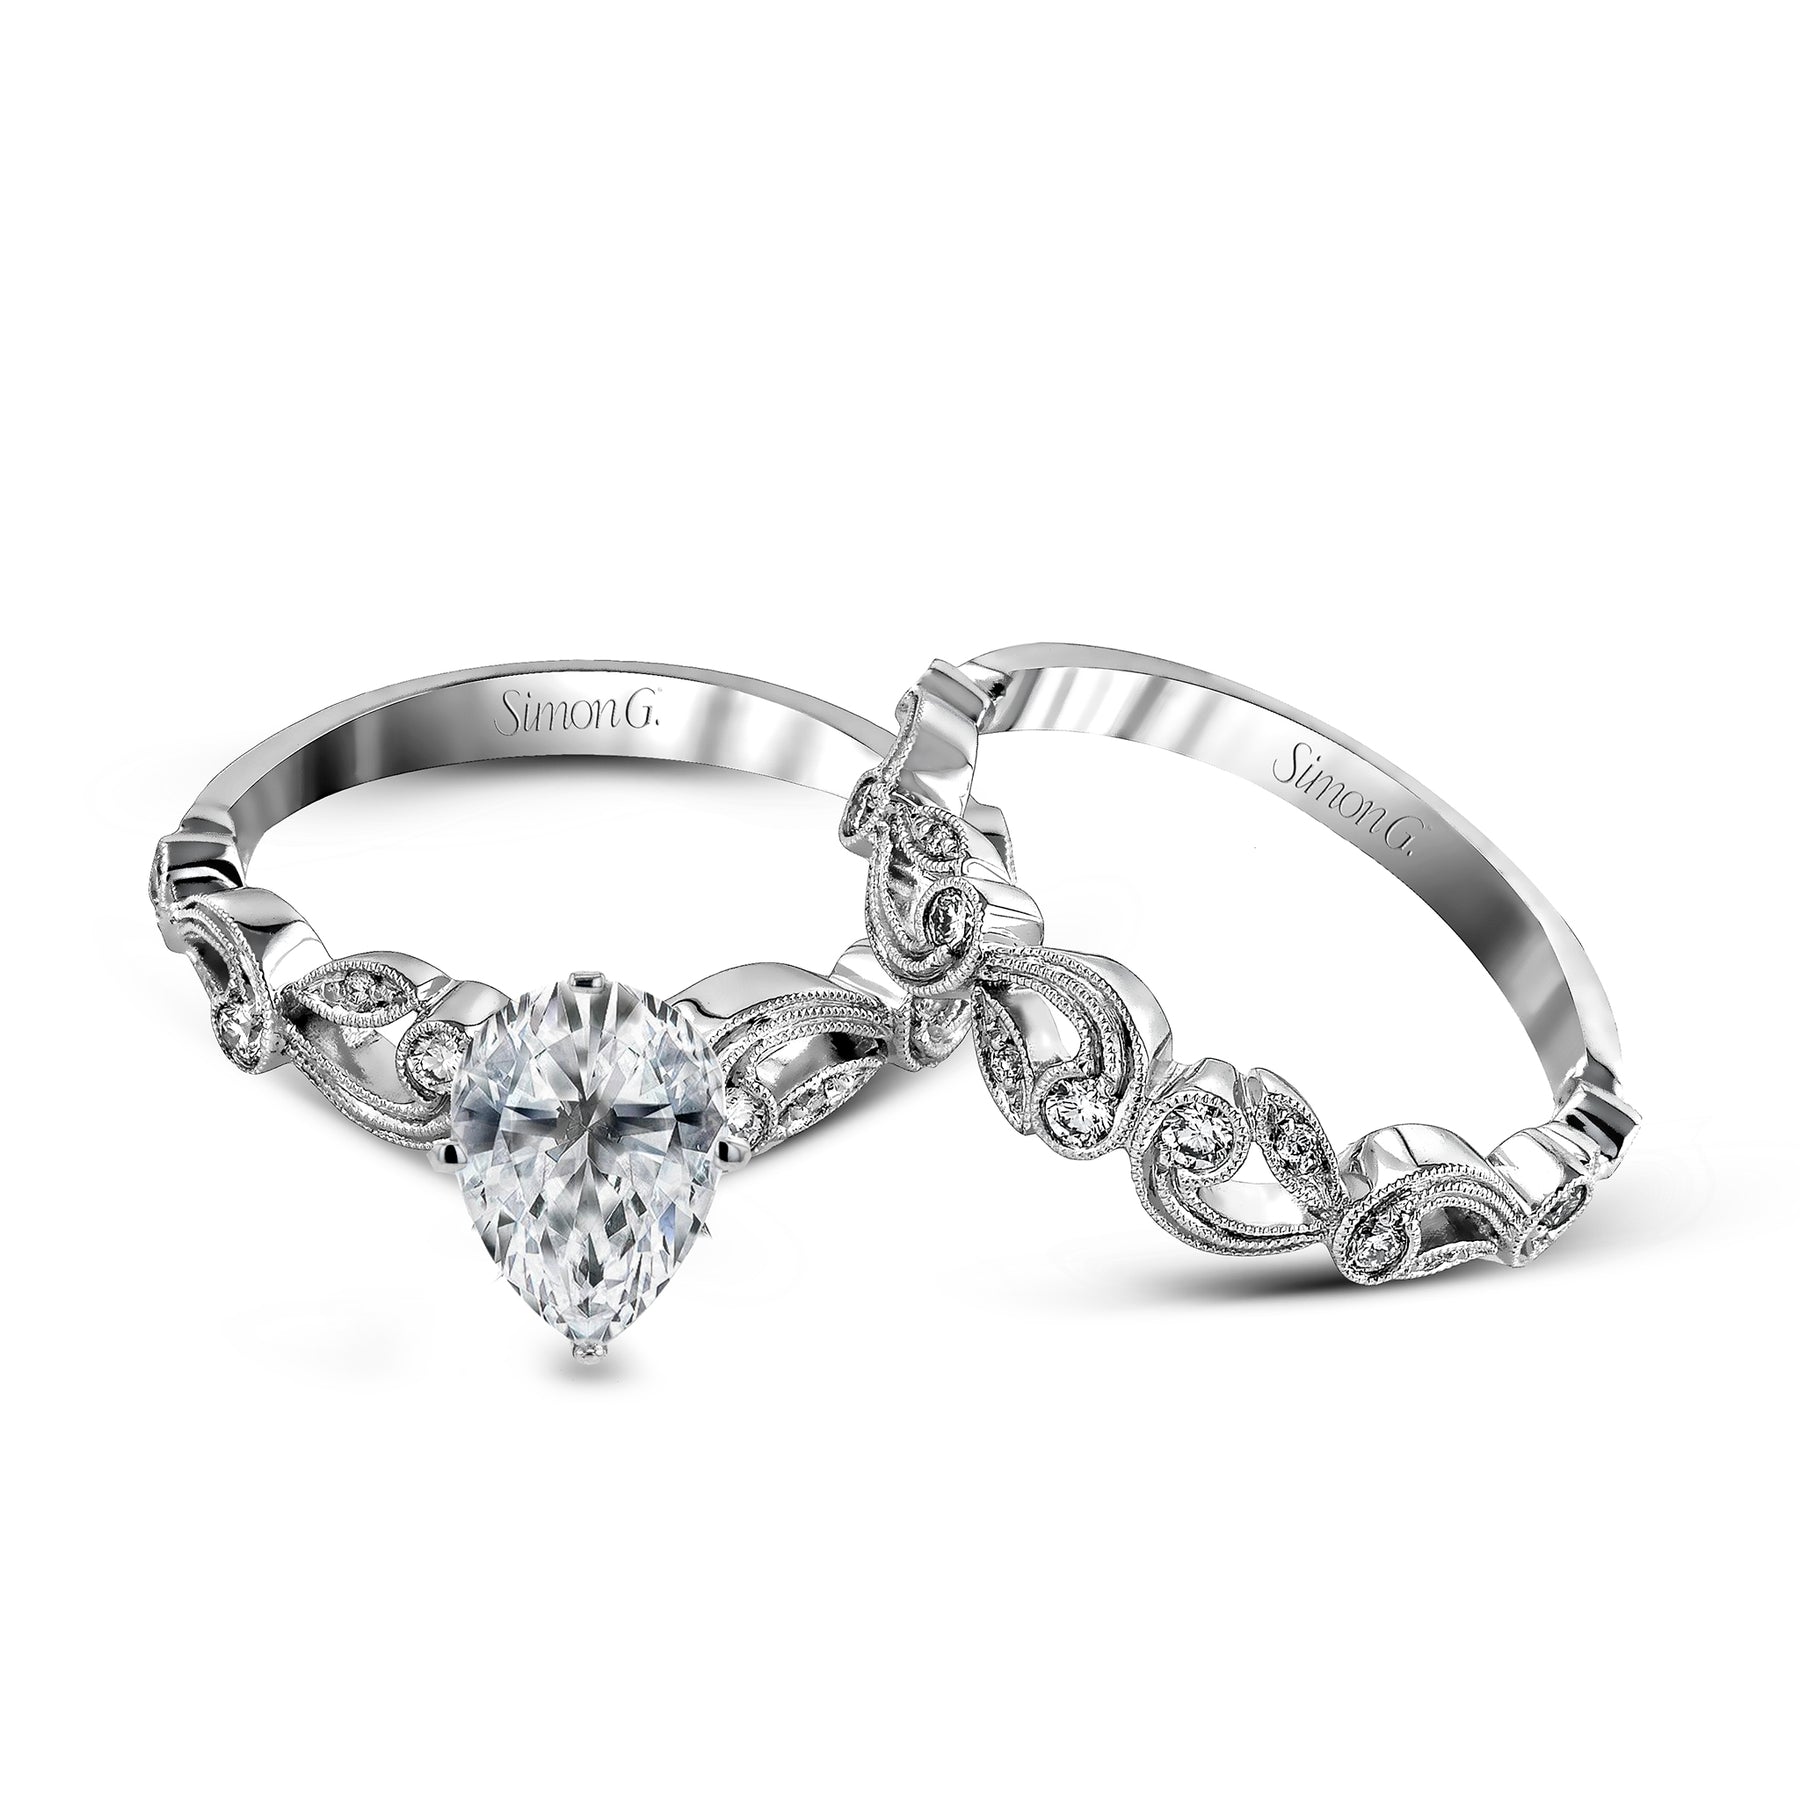 Princess-cut Trellis Engagement Ring & Matching Wedding Band in 18k Gold with Diamonds TR473-PC